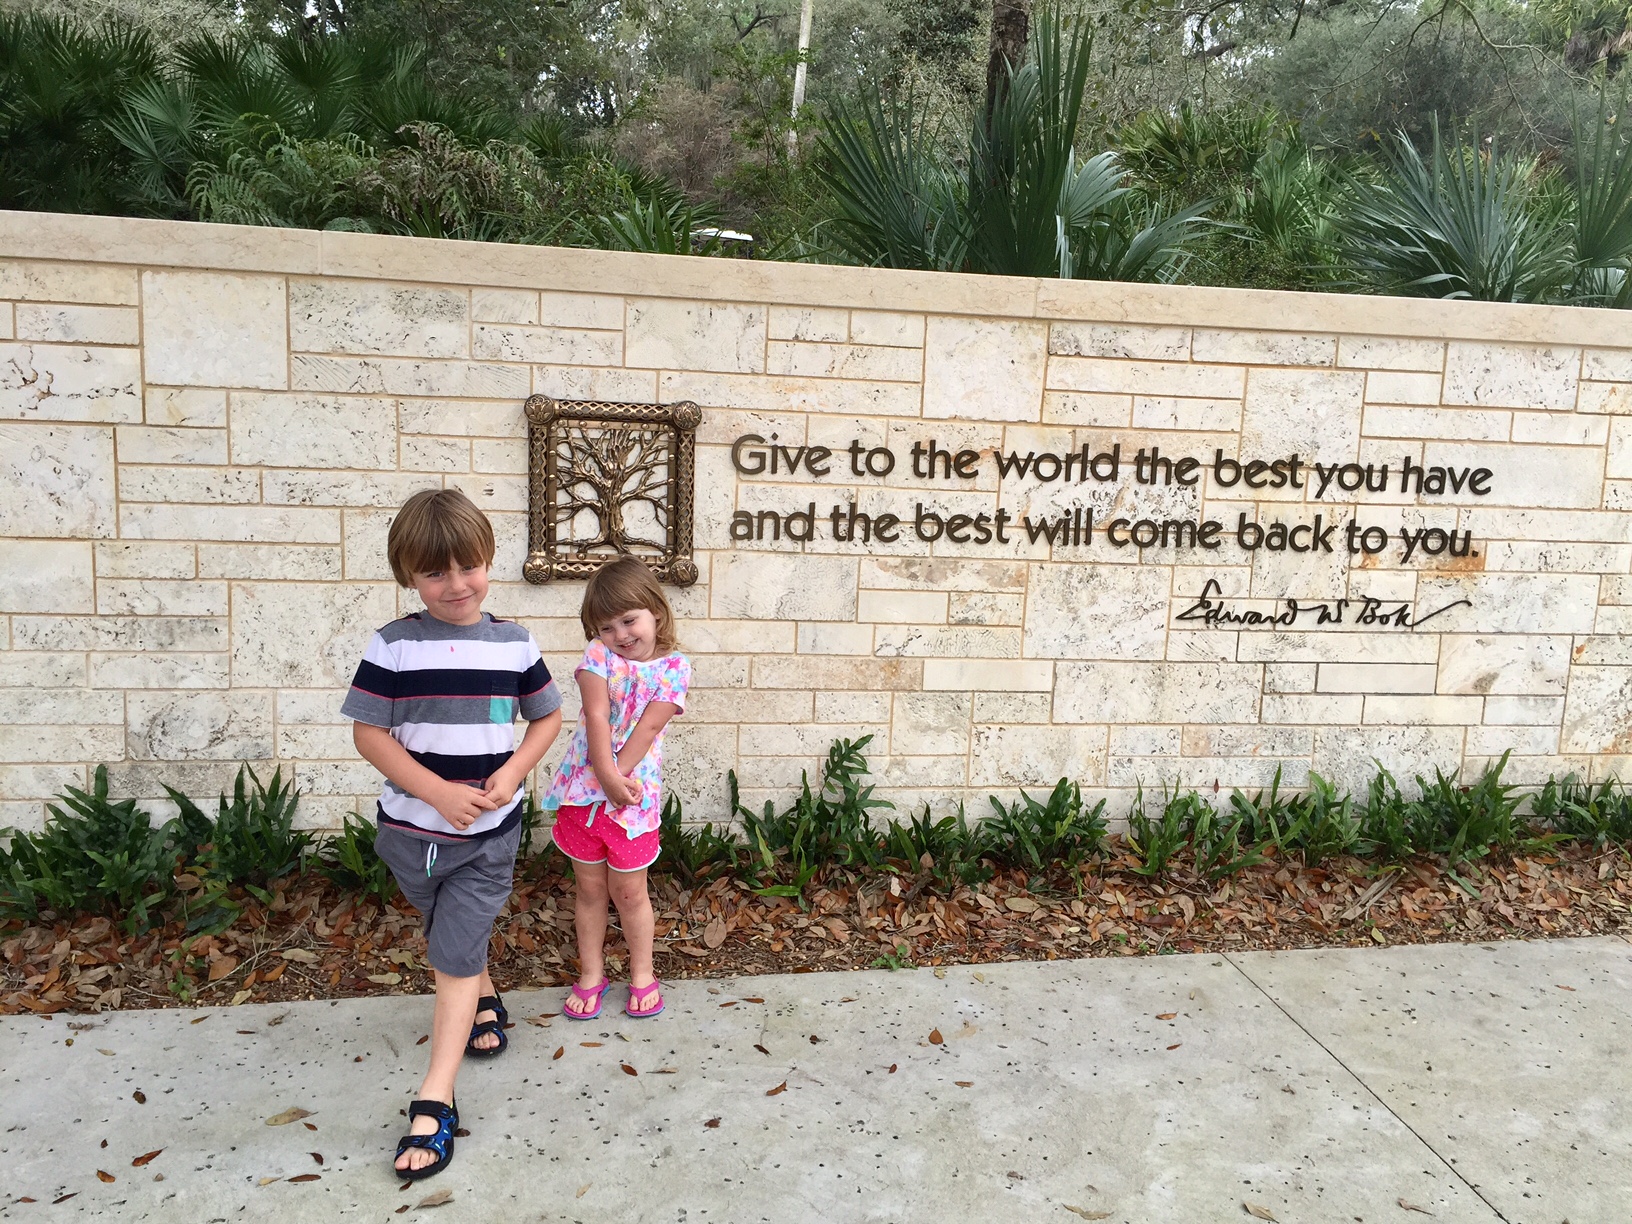 Tips for visiting bok tower gardens with kids | Florida vacation deals | Central Florida | A Cupful of Carters | acupful.com |Things to do in Central Florida | LEGOLAND Florida | florida family attractions | Florida botanical gardens